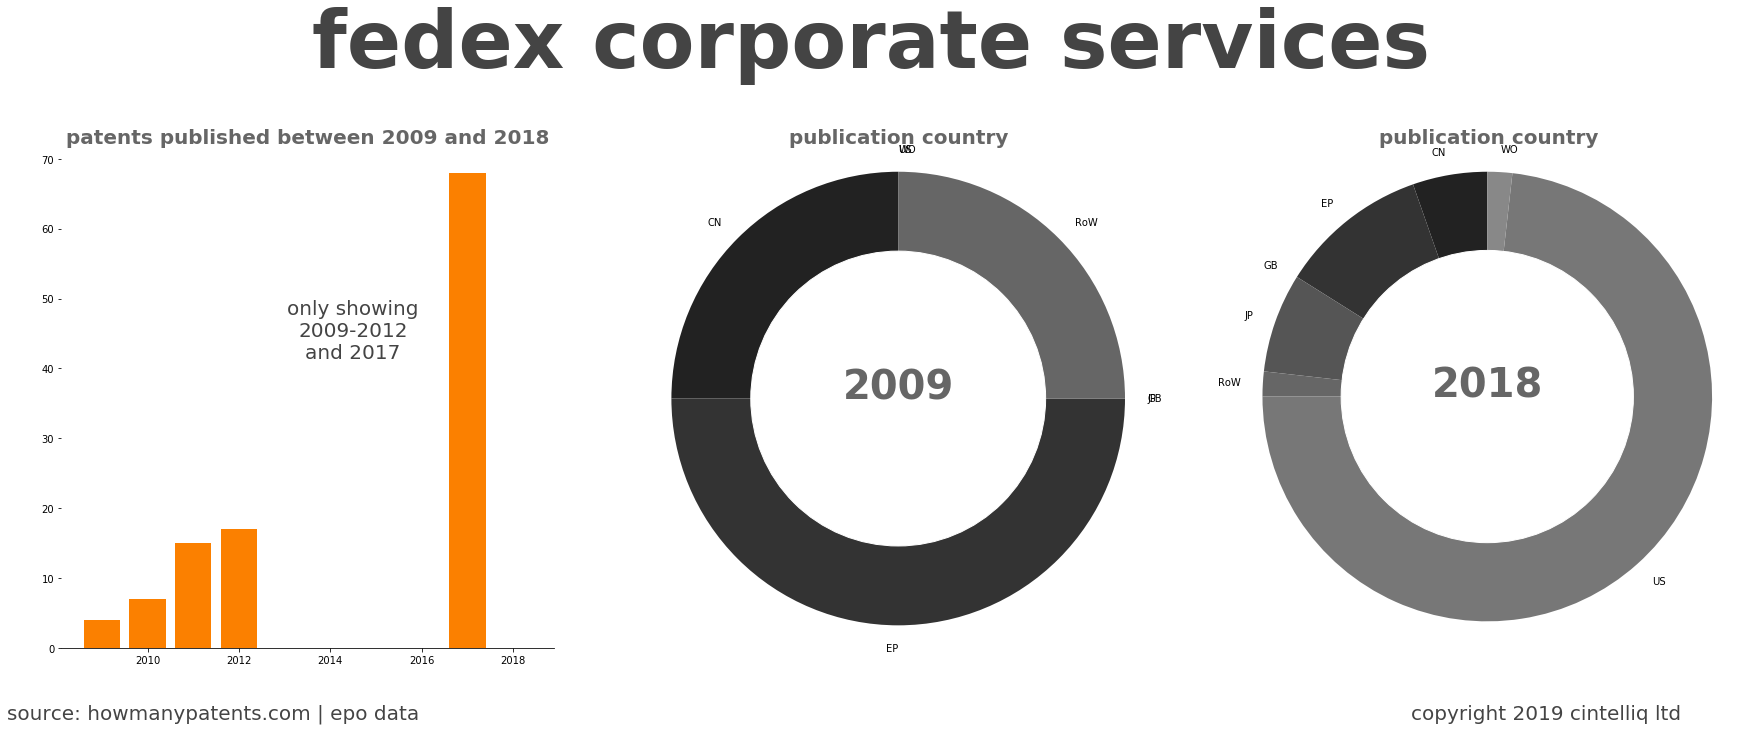 summary of patents for Fedex Corporate Services